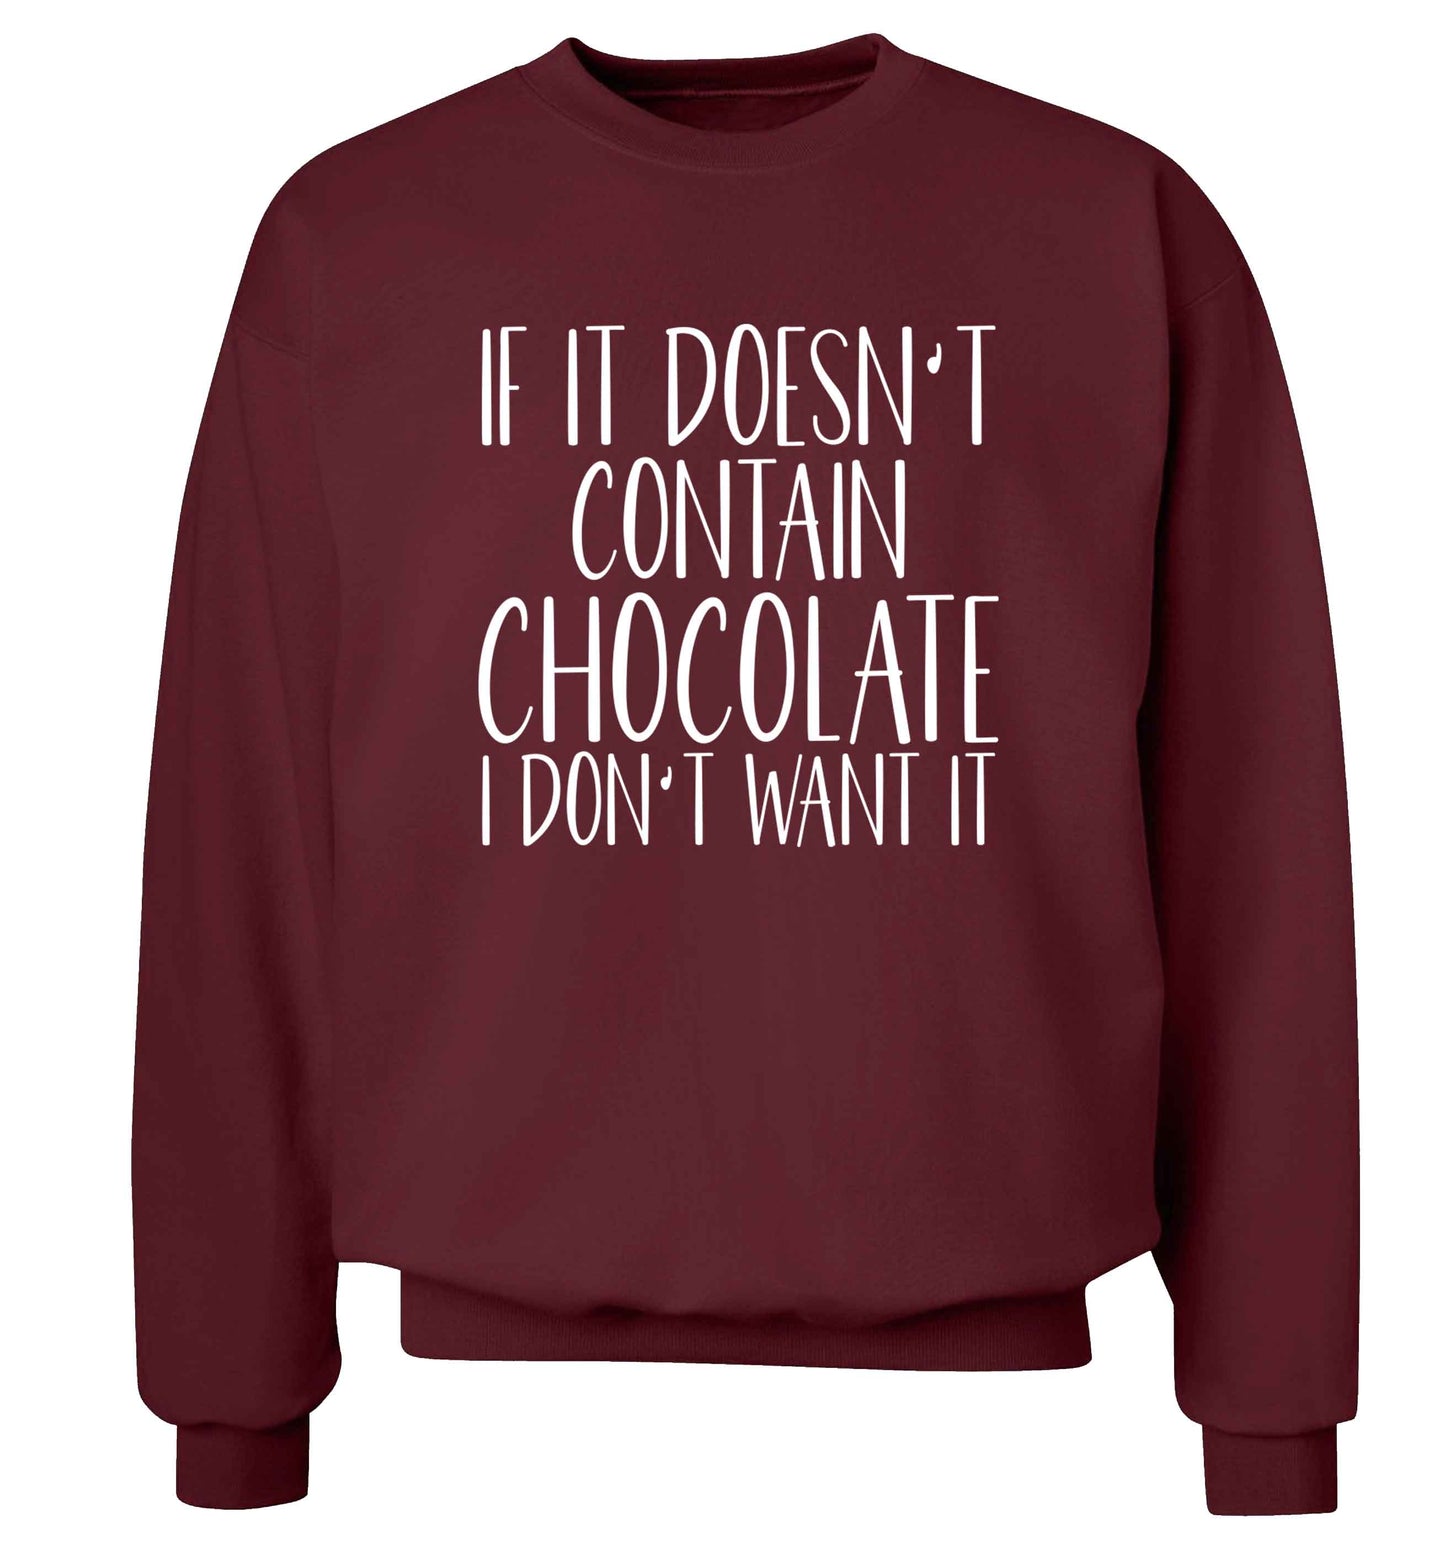 If it doesn't contain chocolate I don't want it adult's unisex maroon sweater 2XL